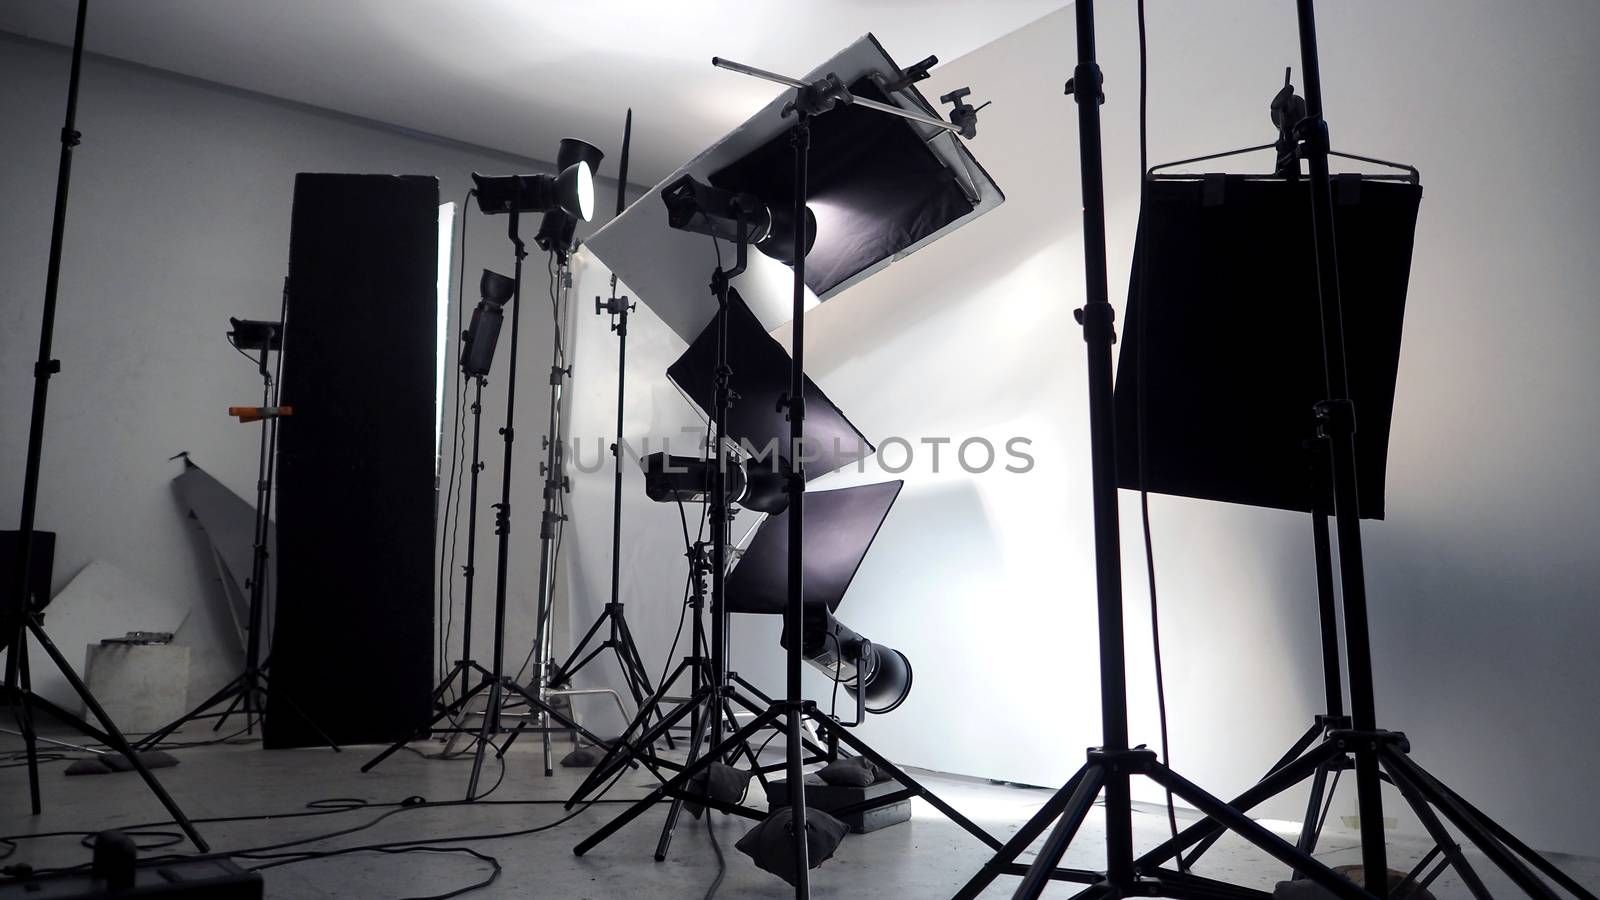 Lighting setup in studio for commercial works by gnepphoto